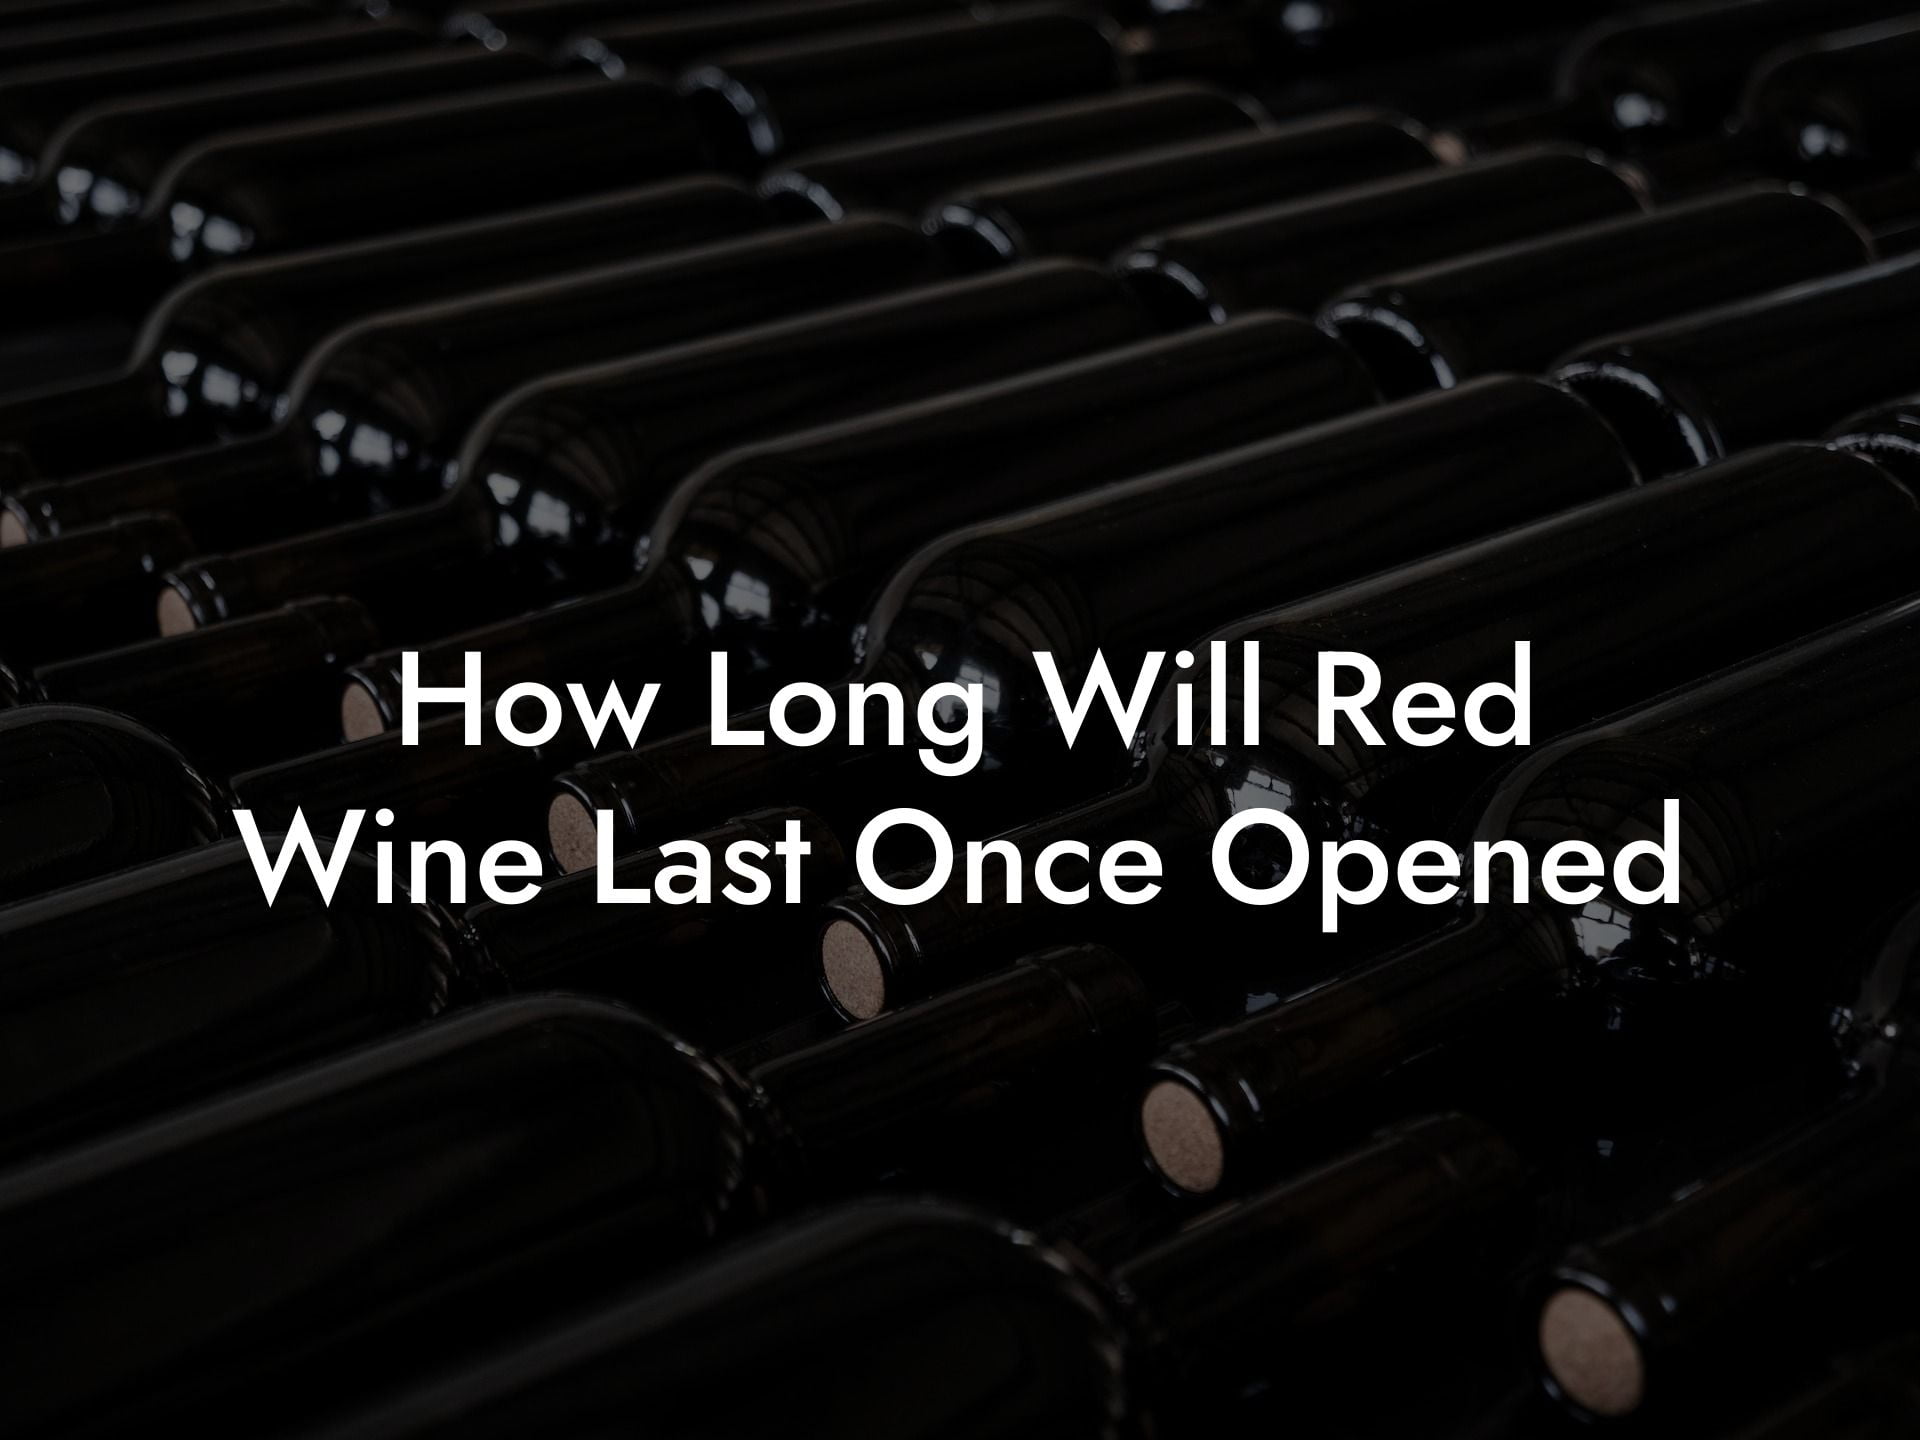 How Long Will Red Wine Last Once Opened